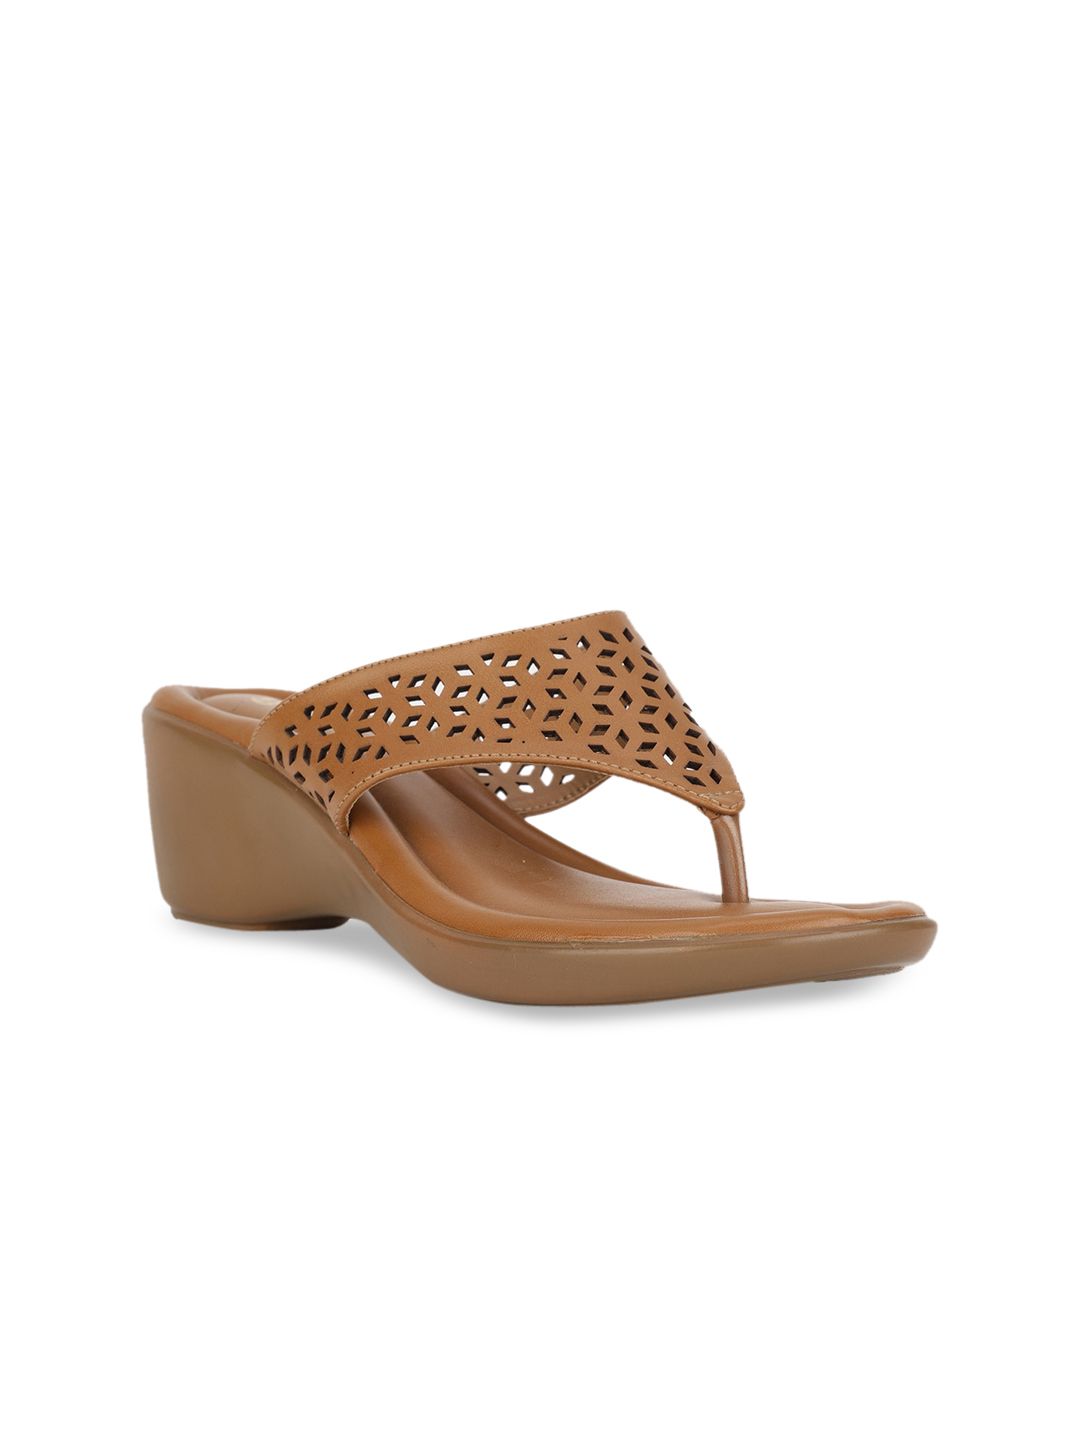 Bata Tan Wedge Pumps with Laser Cuts Price in India